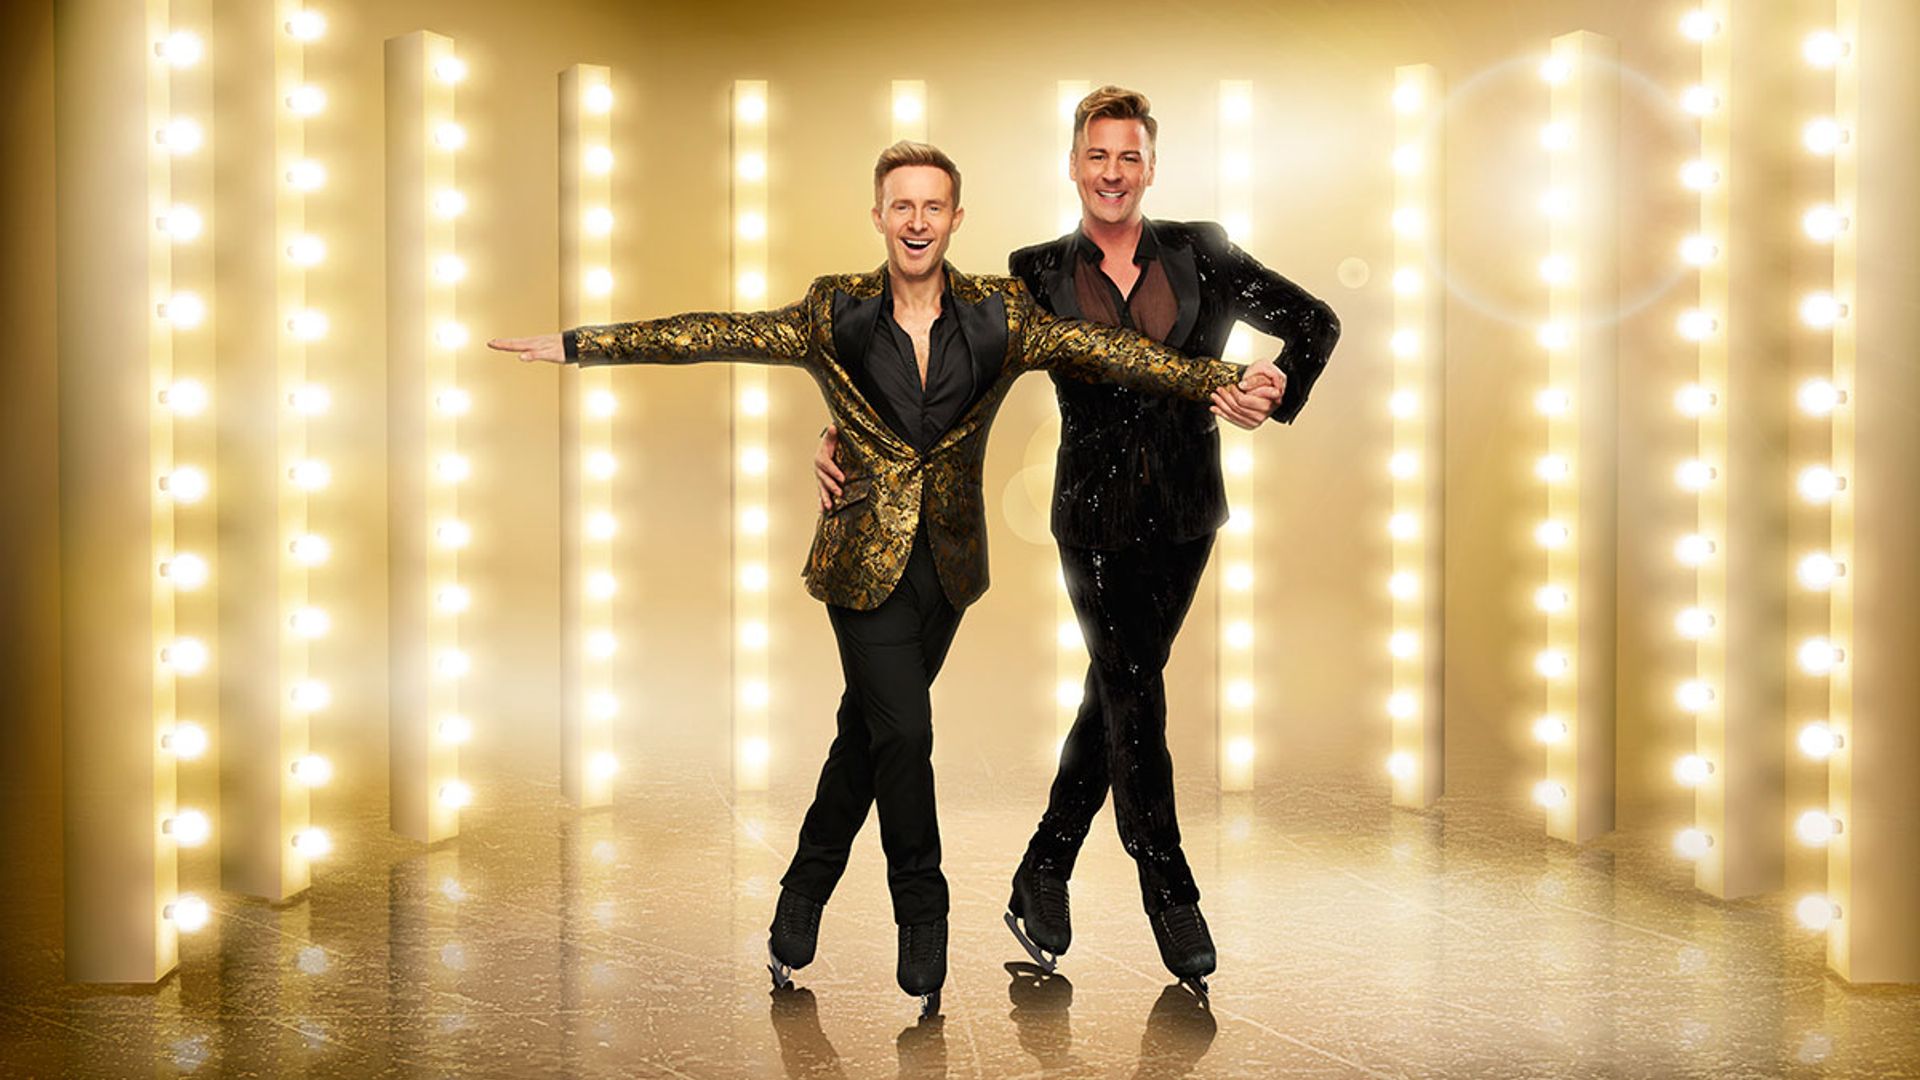 Dancing On Ice partners Ian 'H' Watkins and Matt Evers receive Ofcom complaints for same-sex routine